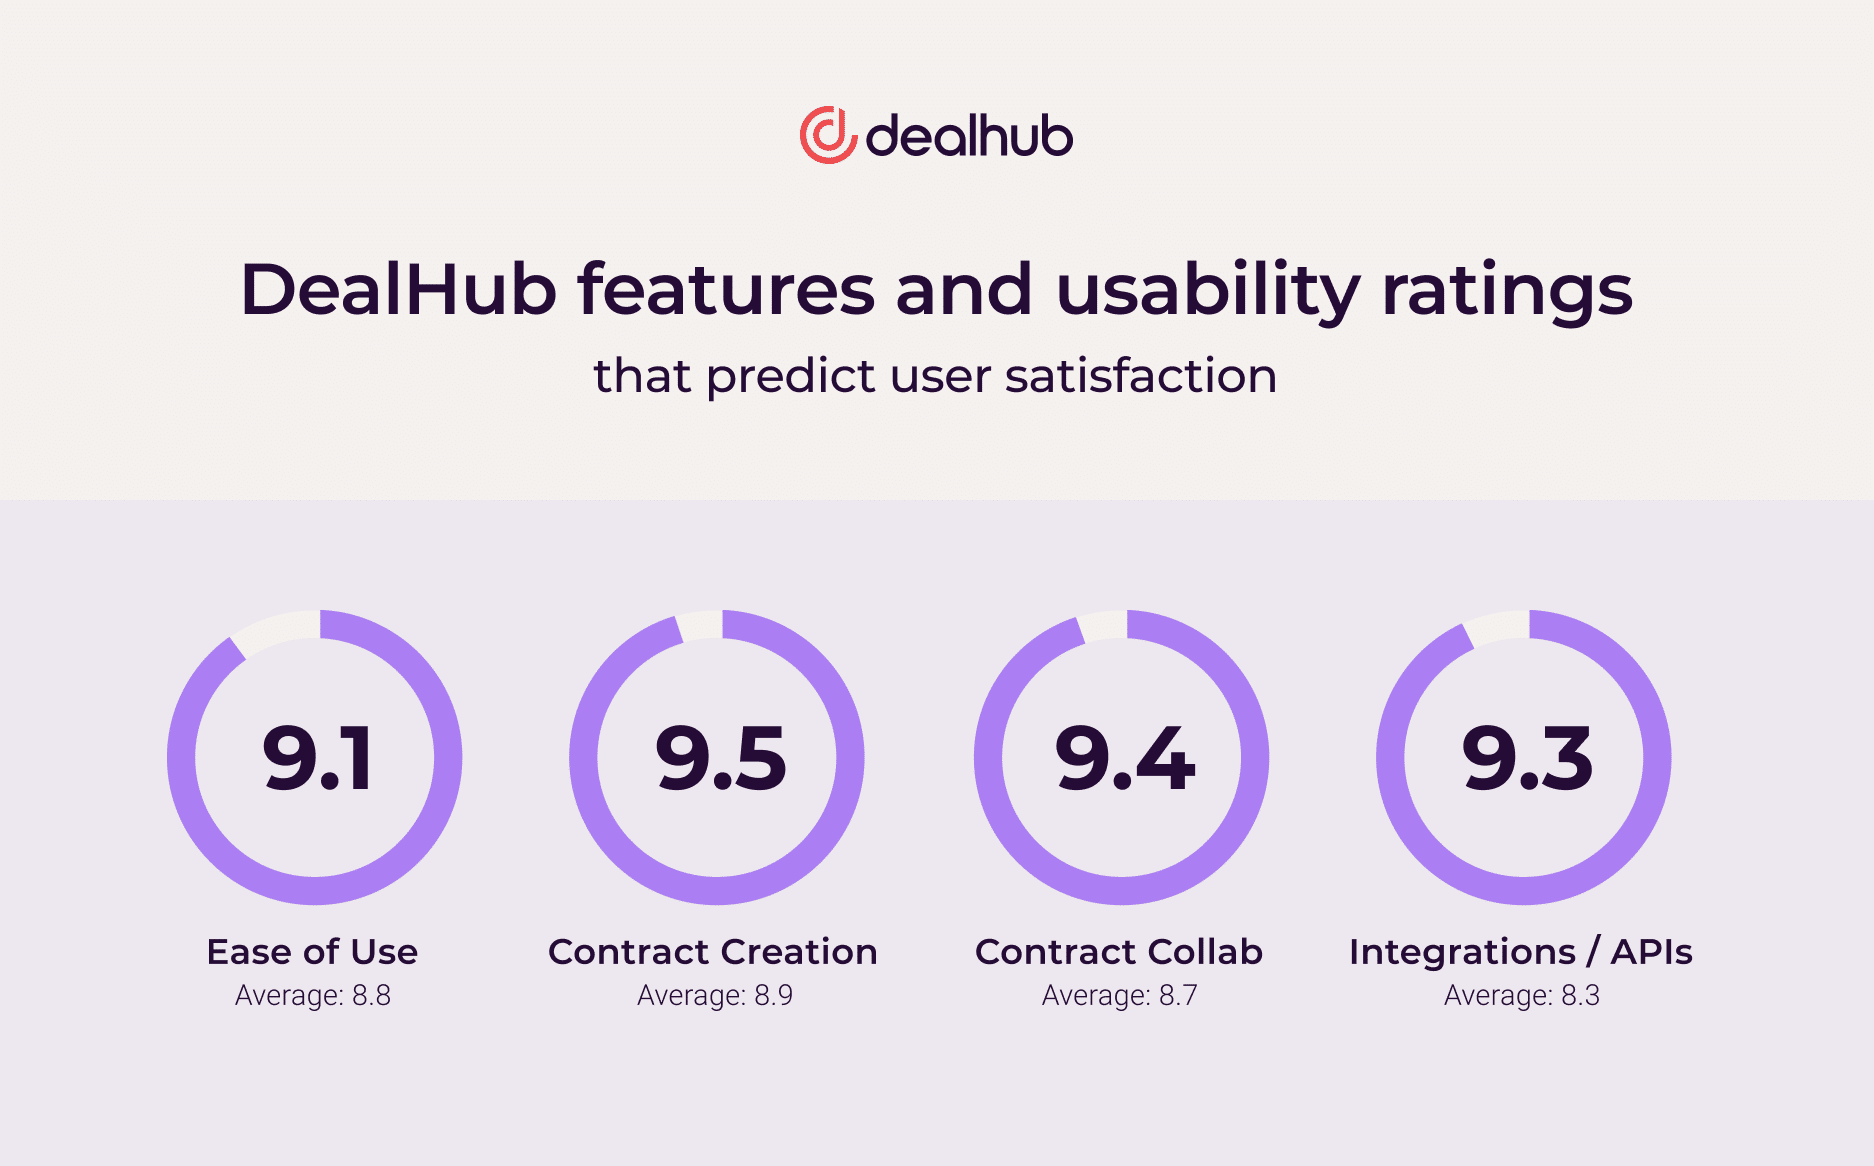 DealHub features and usability ratings that predict user satisfaction